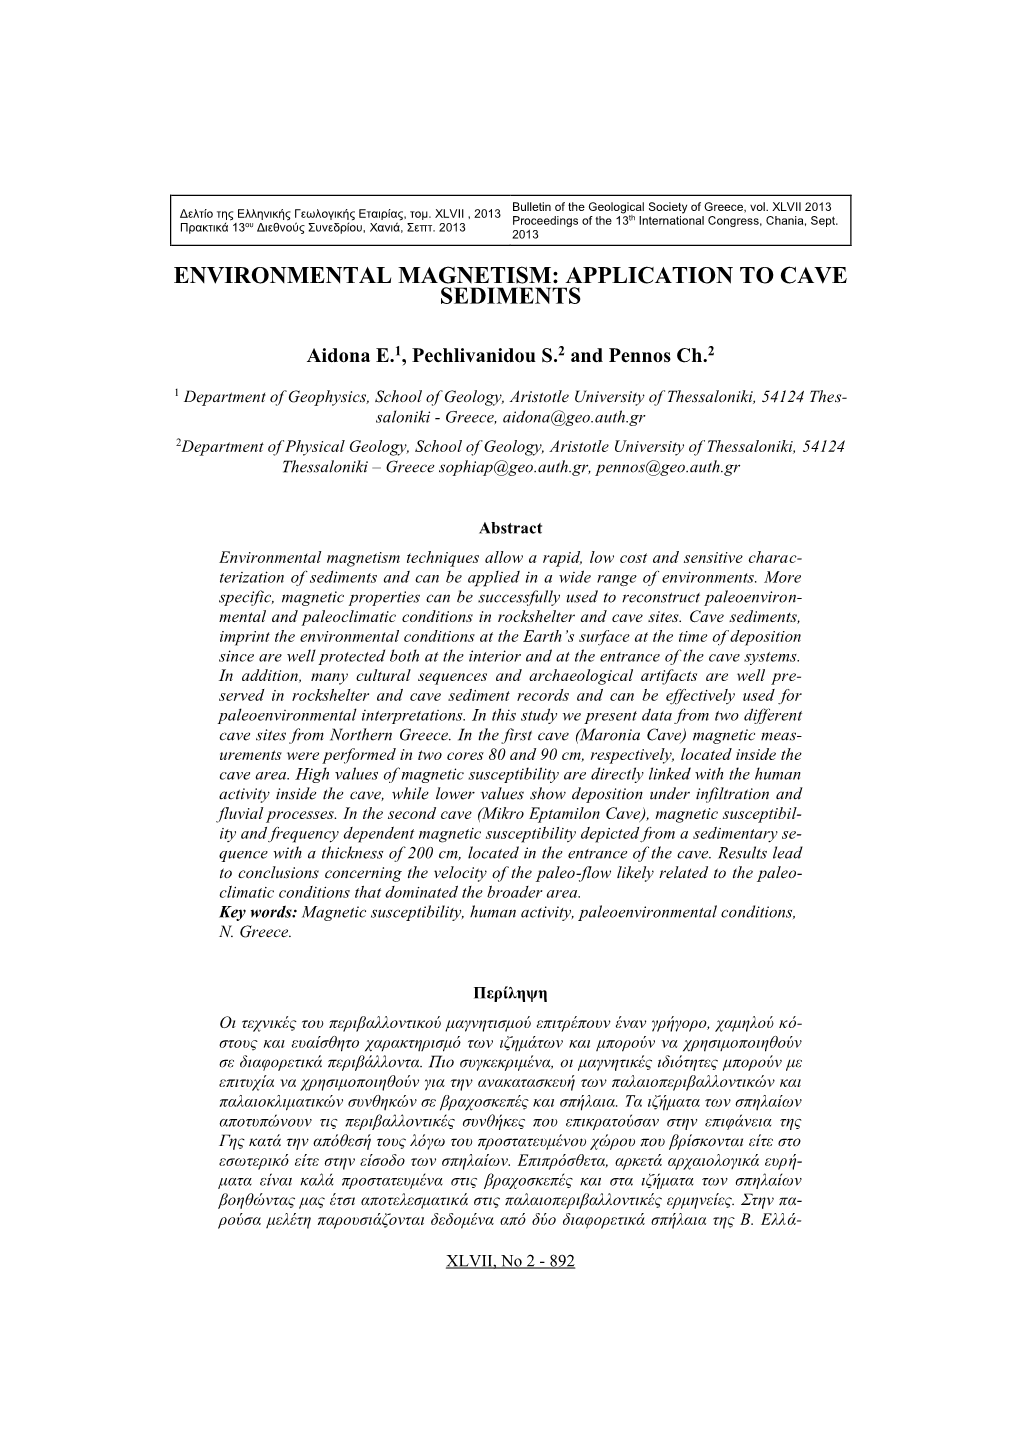 Environmental Magnetism: Application to Cave Sediments